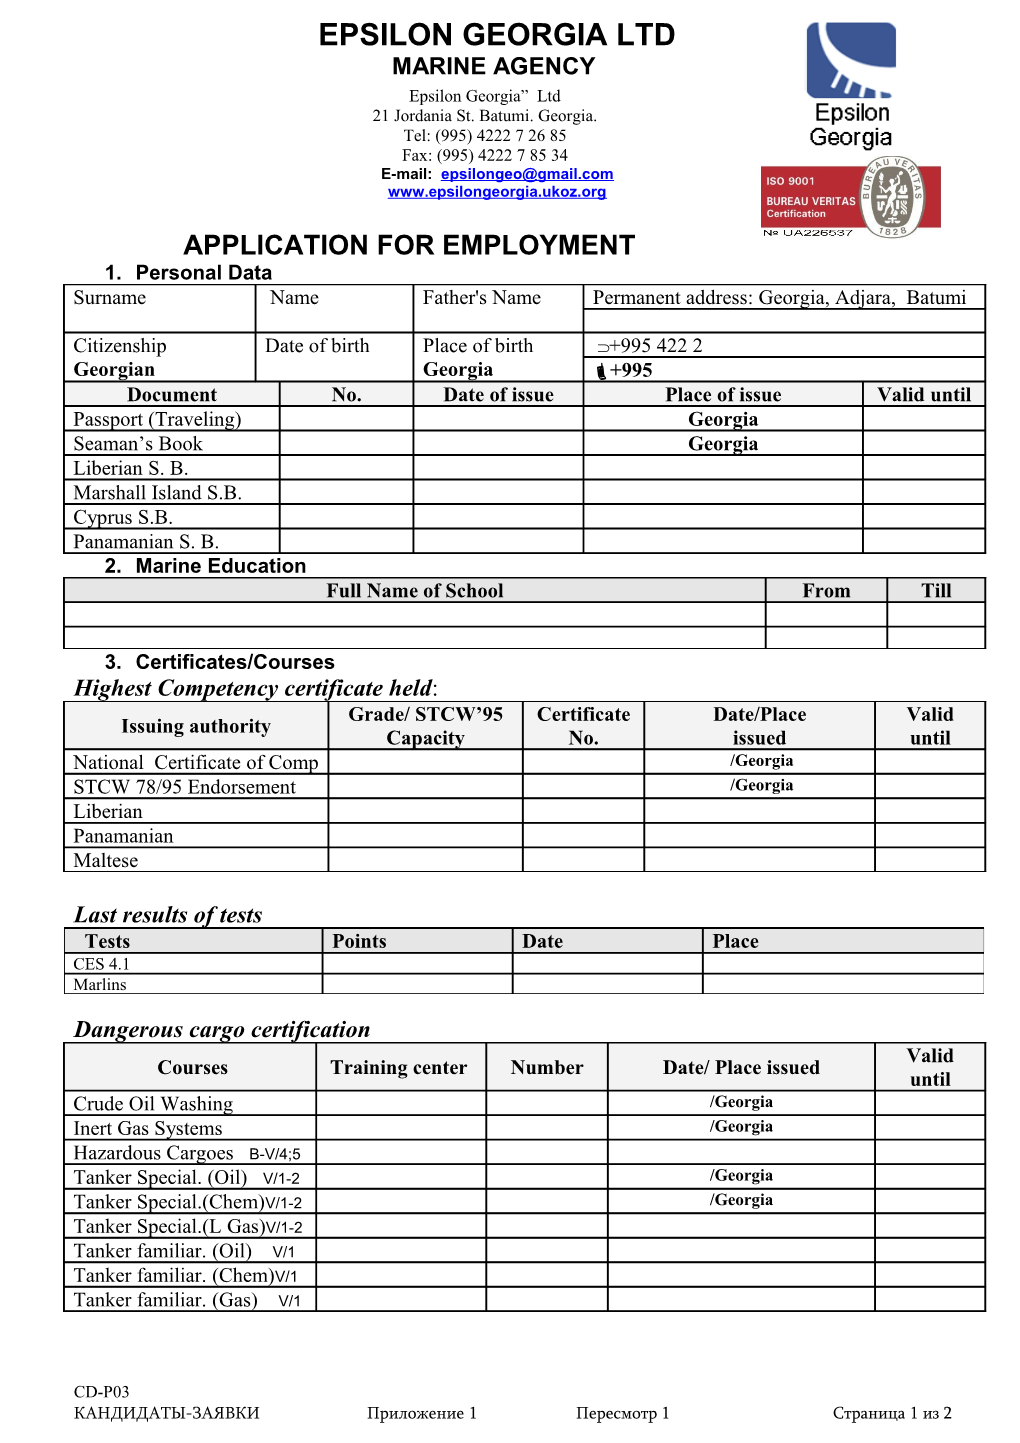 Application for Employment s76